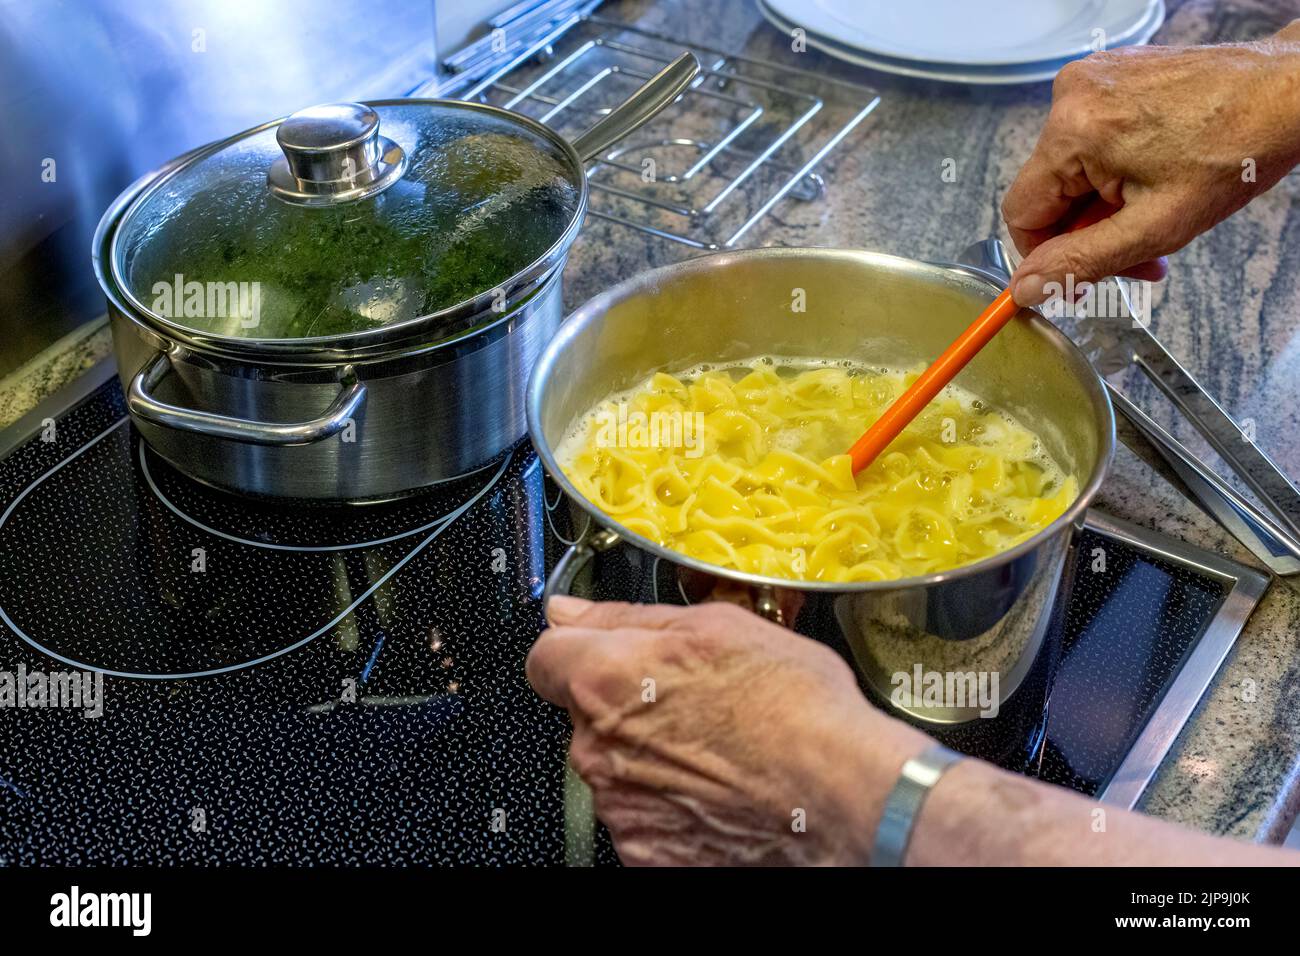 close-up of old womans hands and stove with a pot and pasta Stock Photo